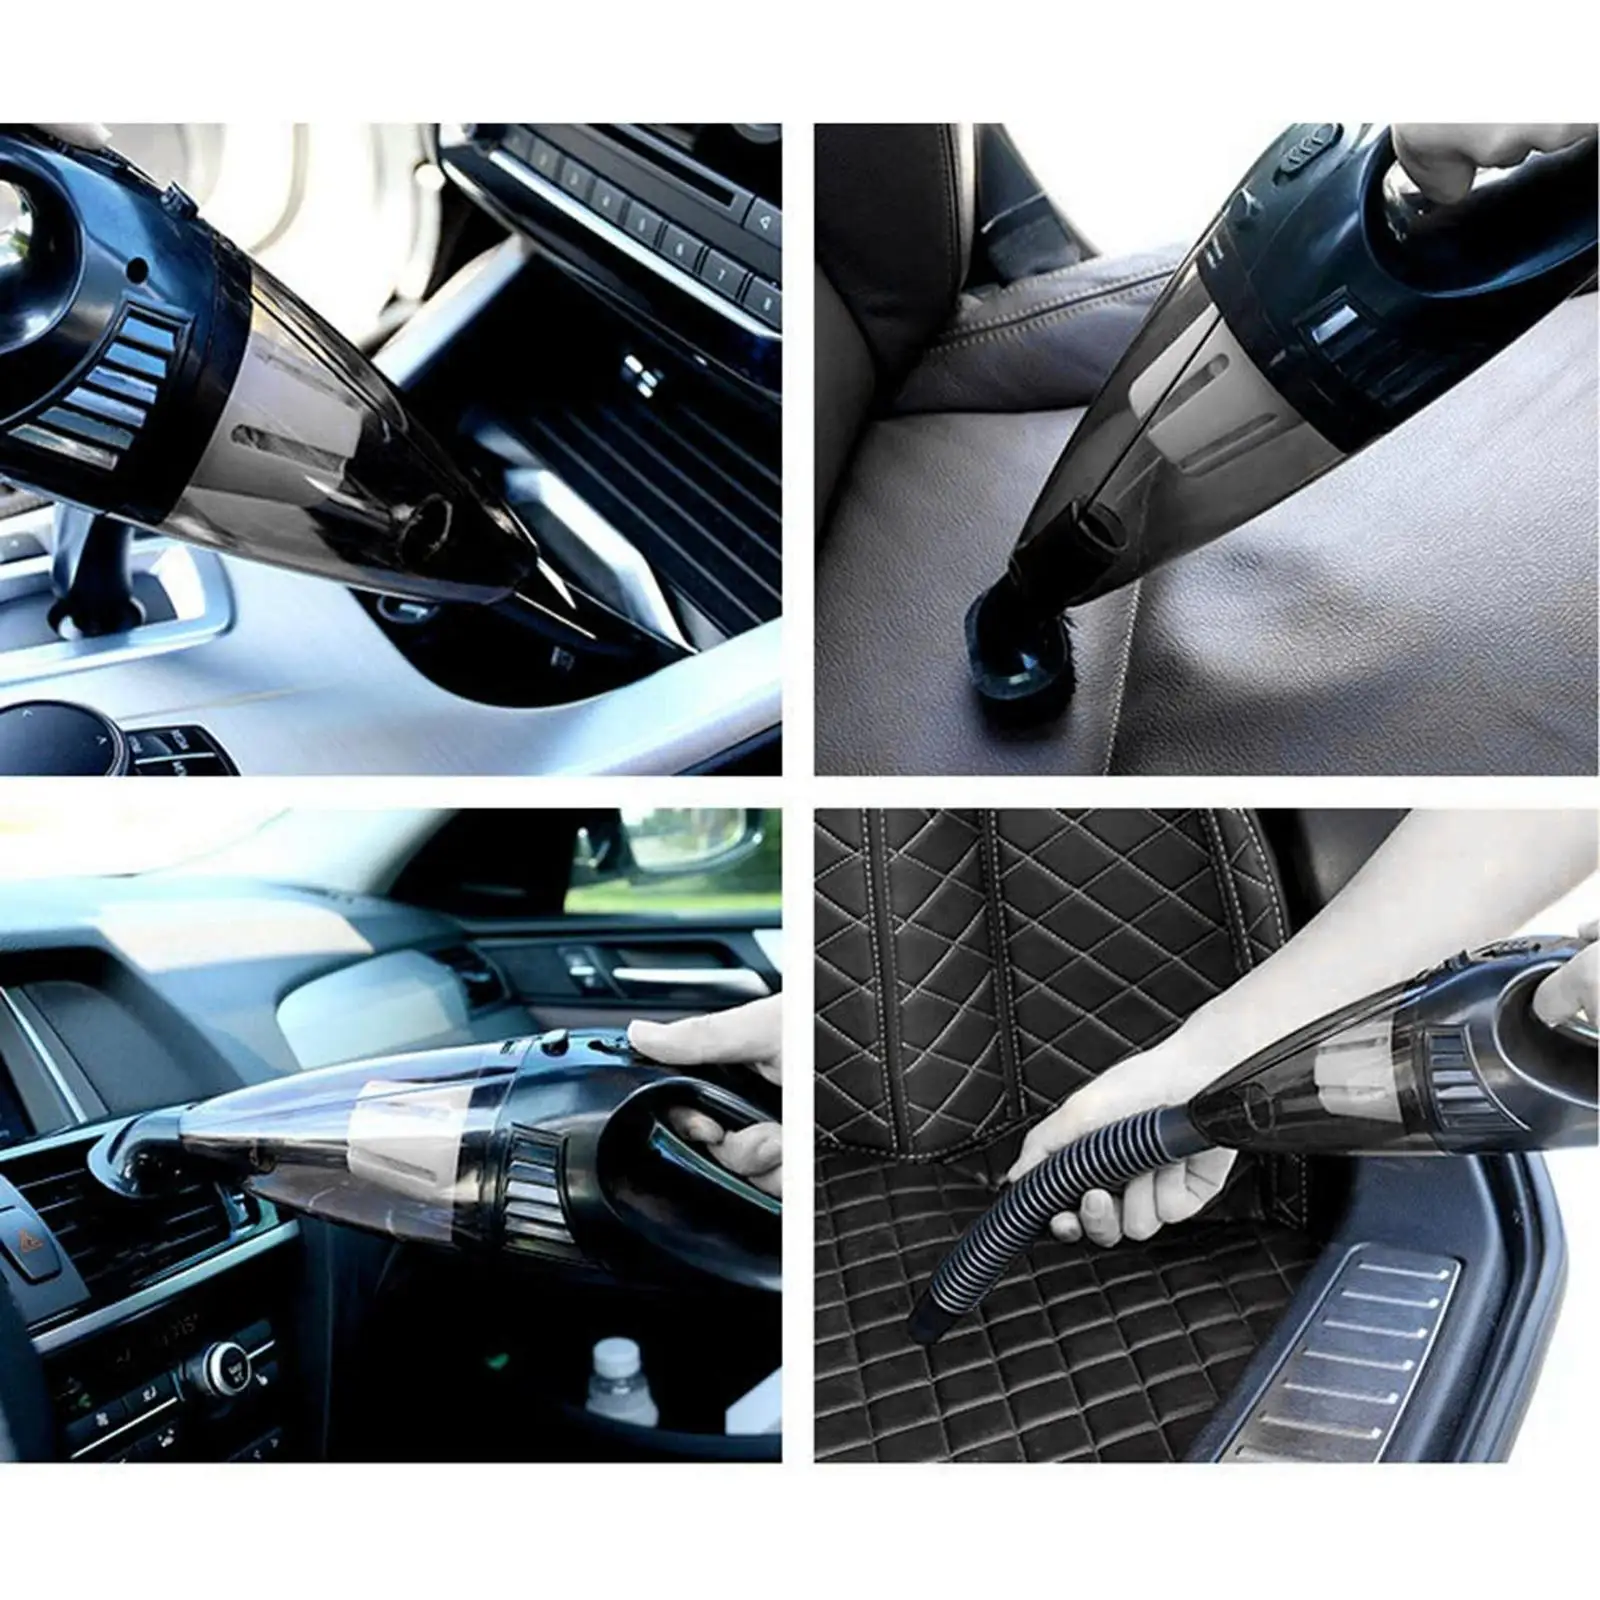  Car Vacuum Cleaner for Car Interior Detailing Cleaning with